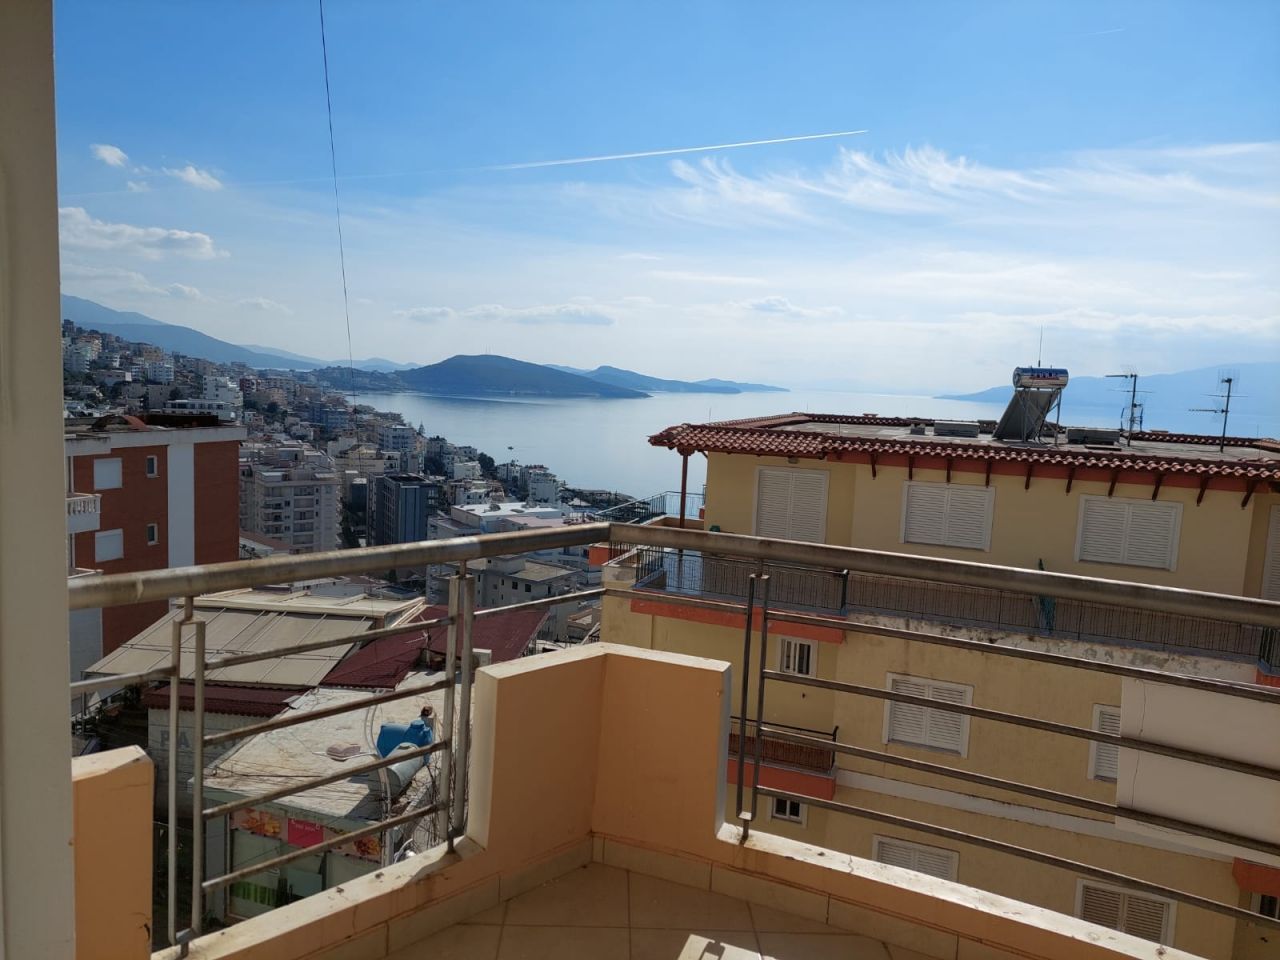 Apartments for Sale in Saranda Albania with a Sea View